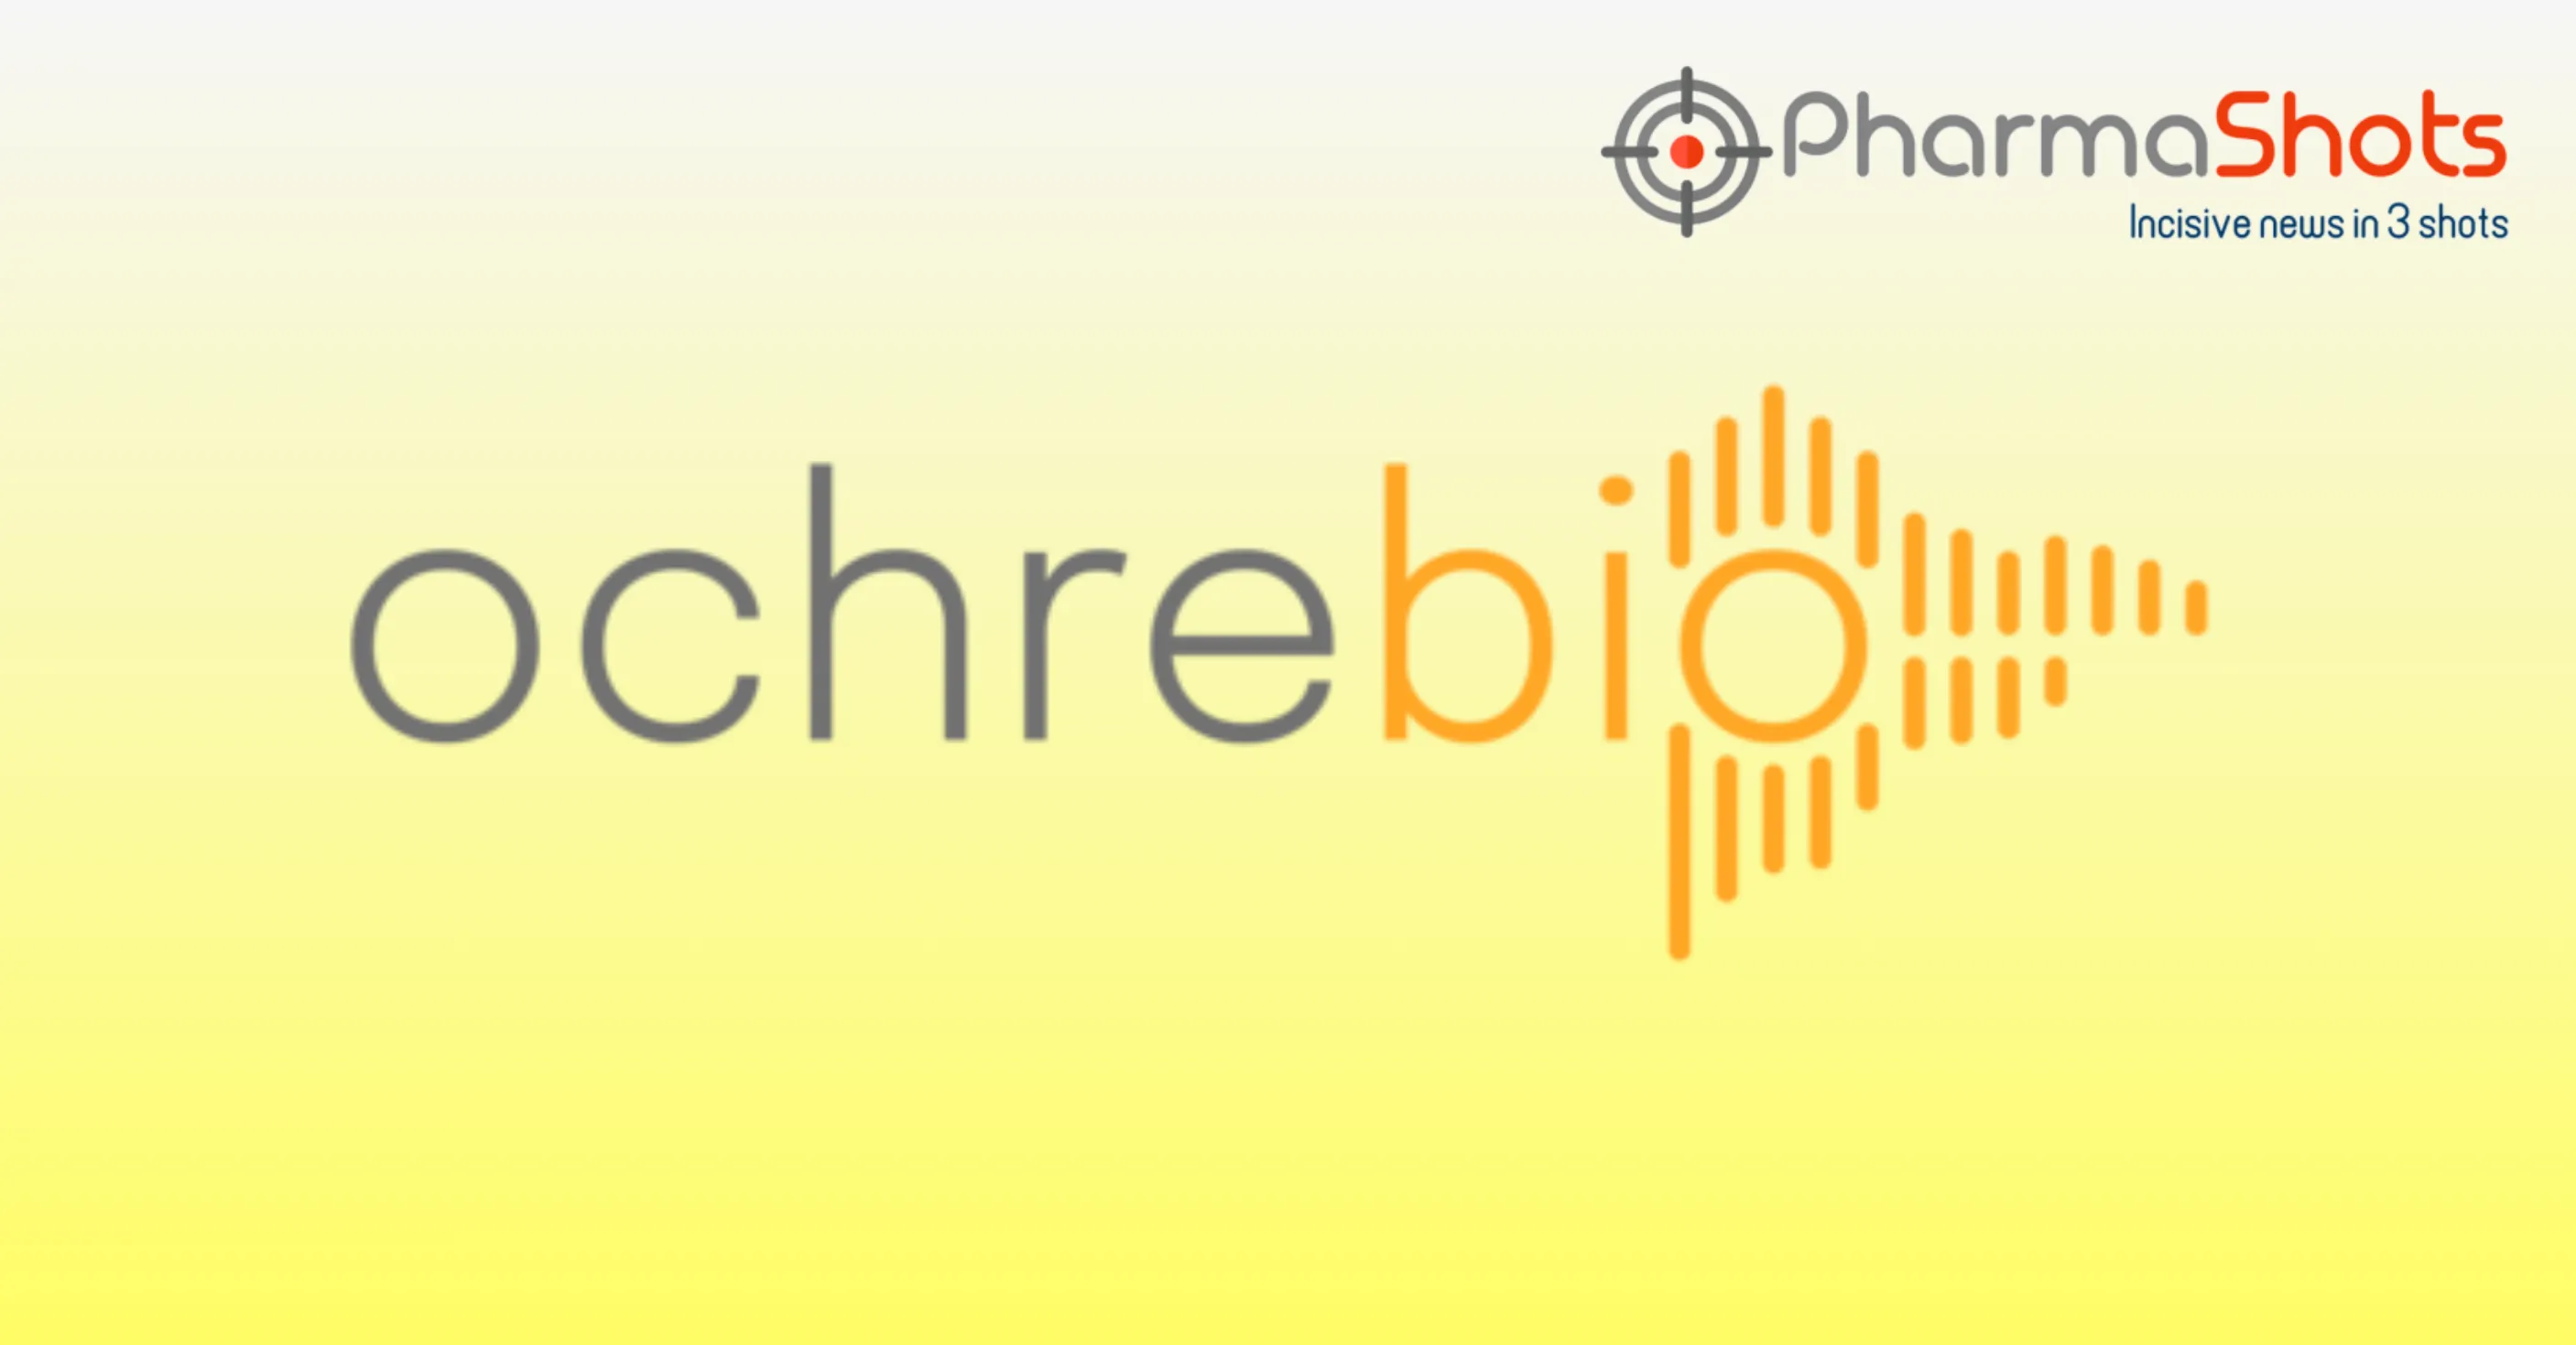 Ochre Bio and Boehringer Ingelheim Enter into a Collaboration to Develop and Commercialize Novel Regenerative Treatments for Advanced Liver Disease